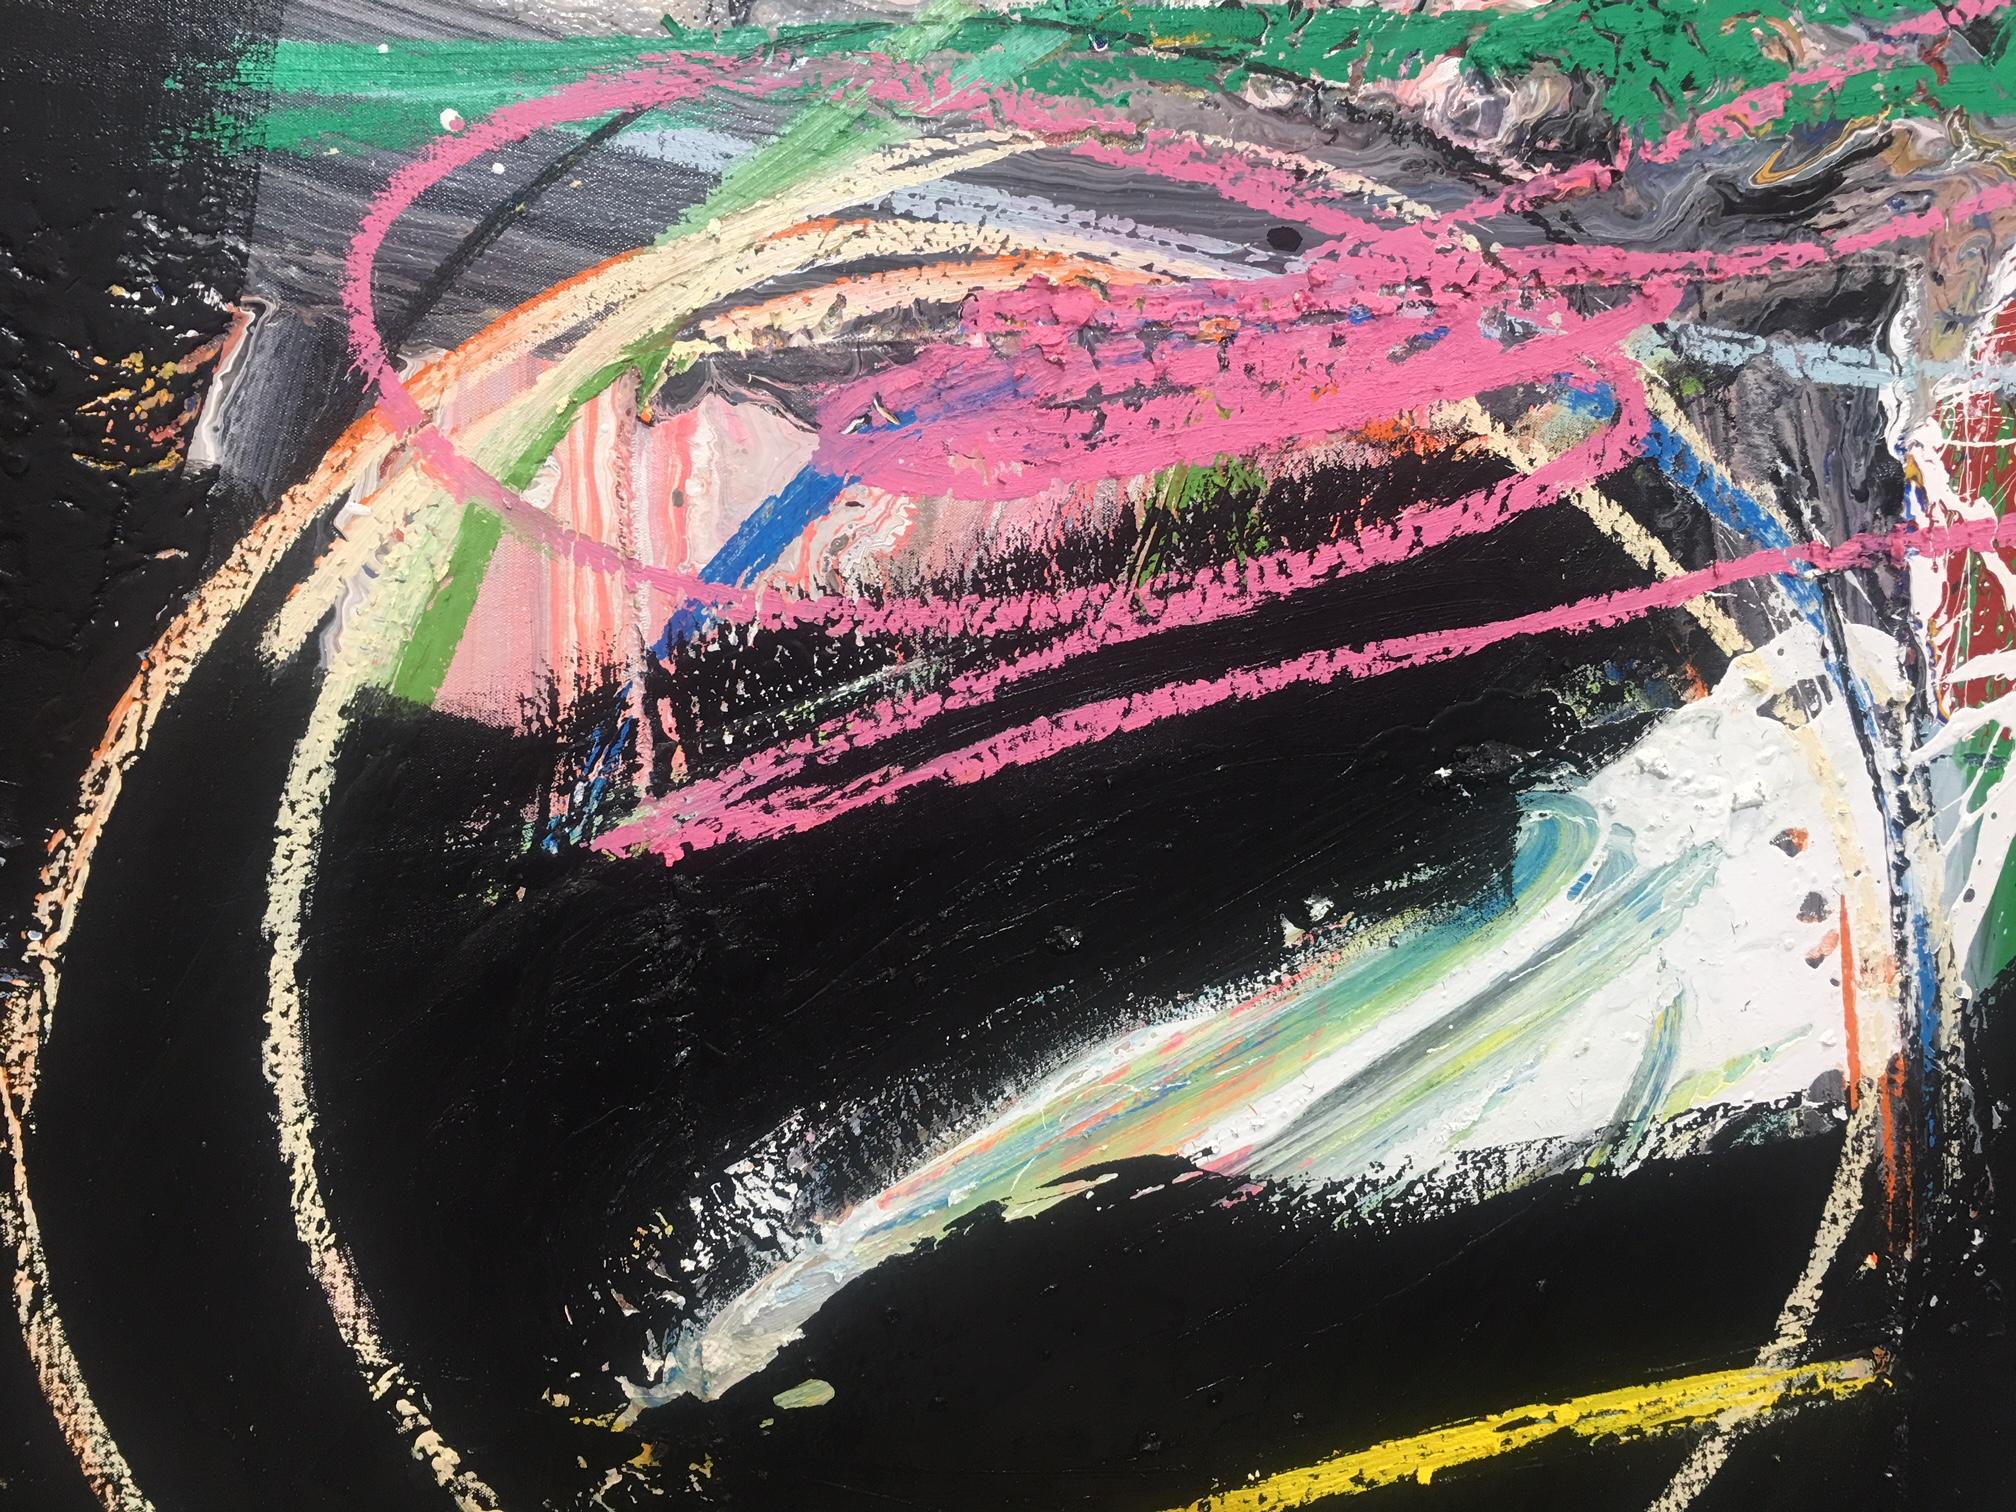 Large Scale Abstract Work on canvas.
Olymio's work is pure and perfect in use of color, balance and composition. 
Although at first glance the graffiti-like scribbles and scratches resemble works by Cy Twombly and Basquiat, these oil paintings are